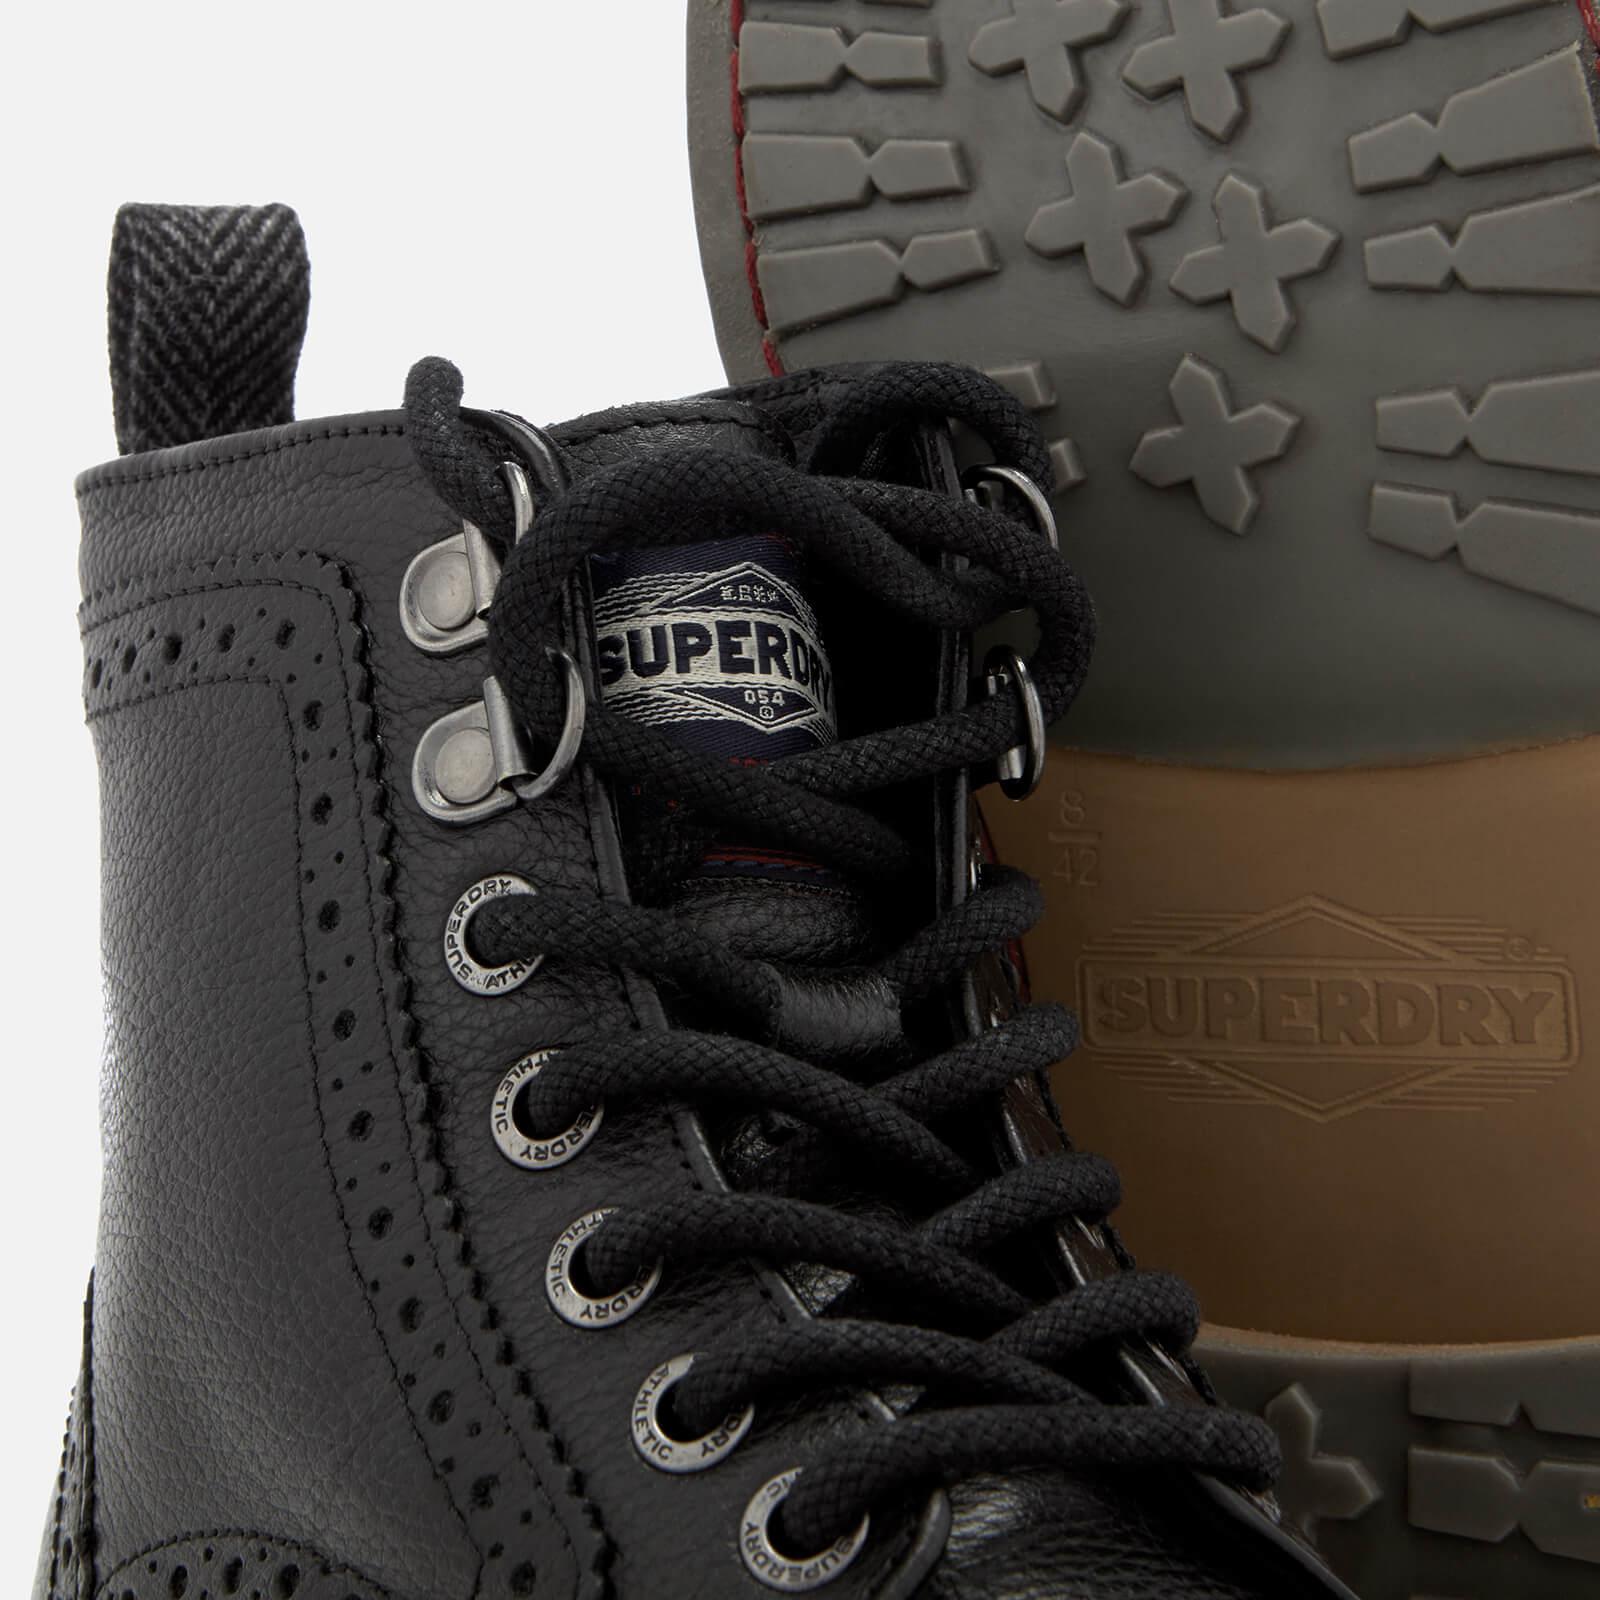 Superdry Leather Shooter Boots in Black for Men - Lyst